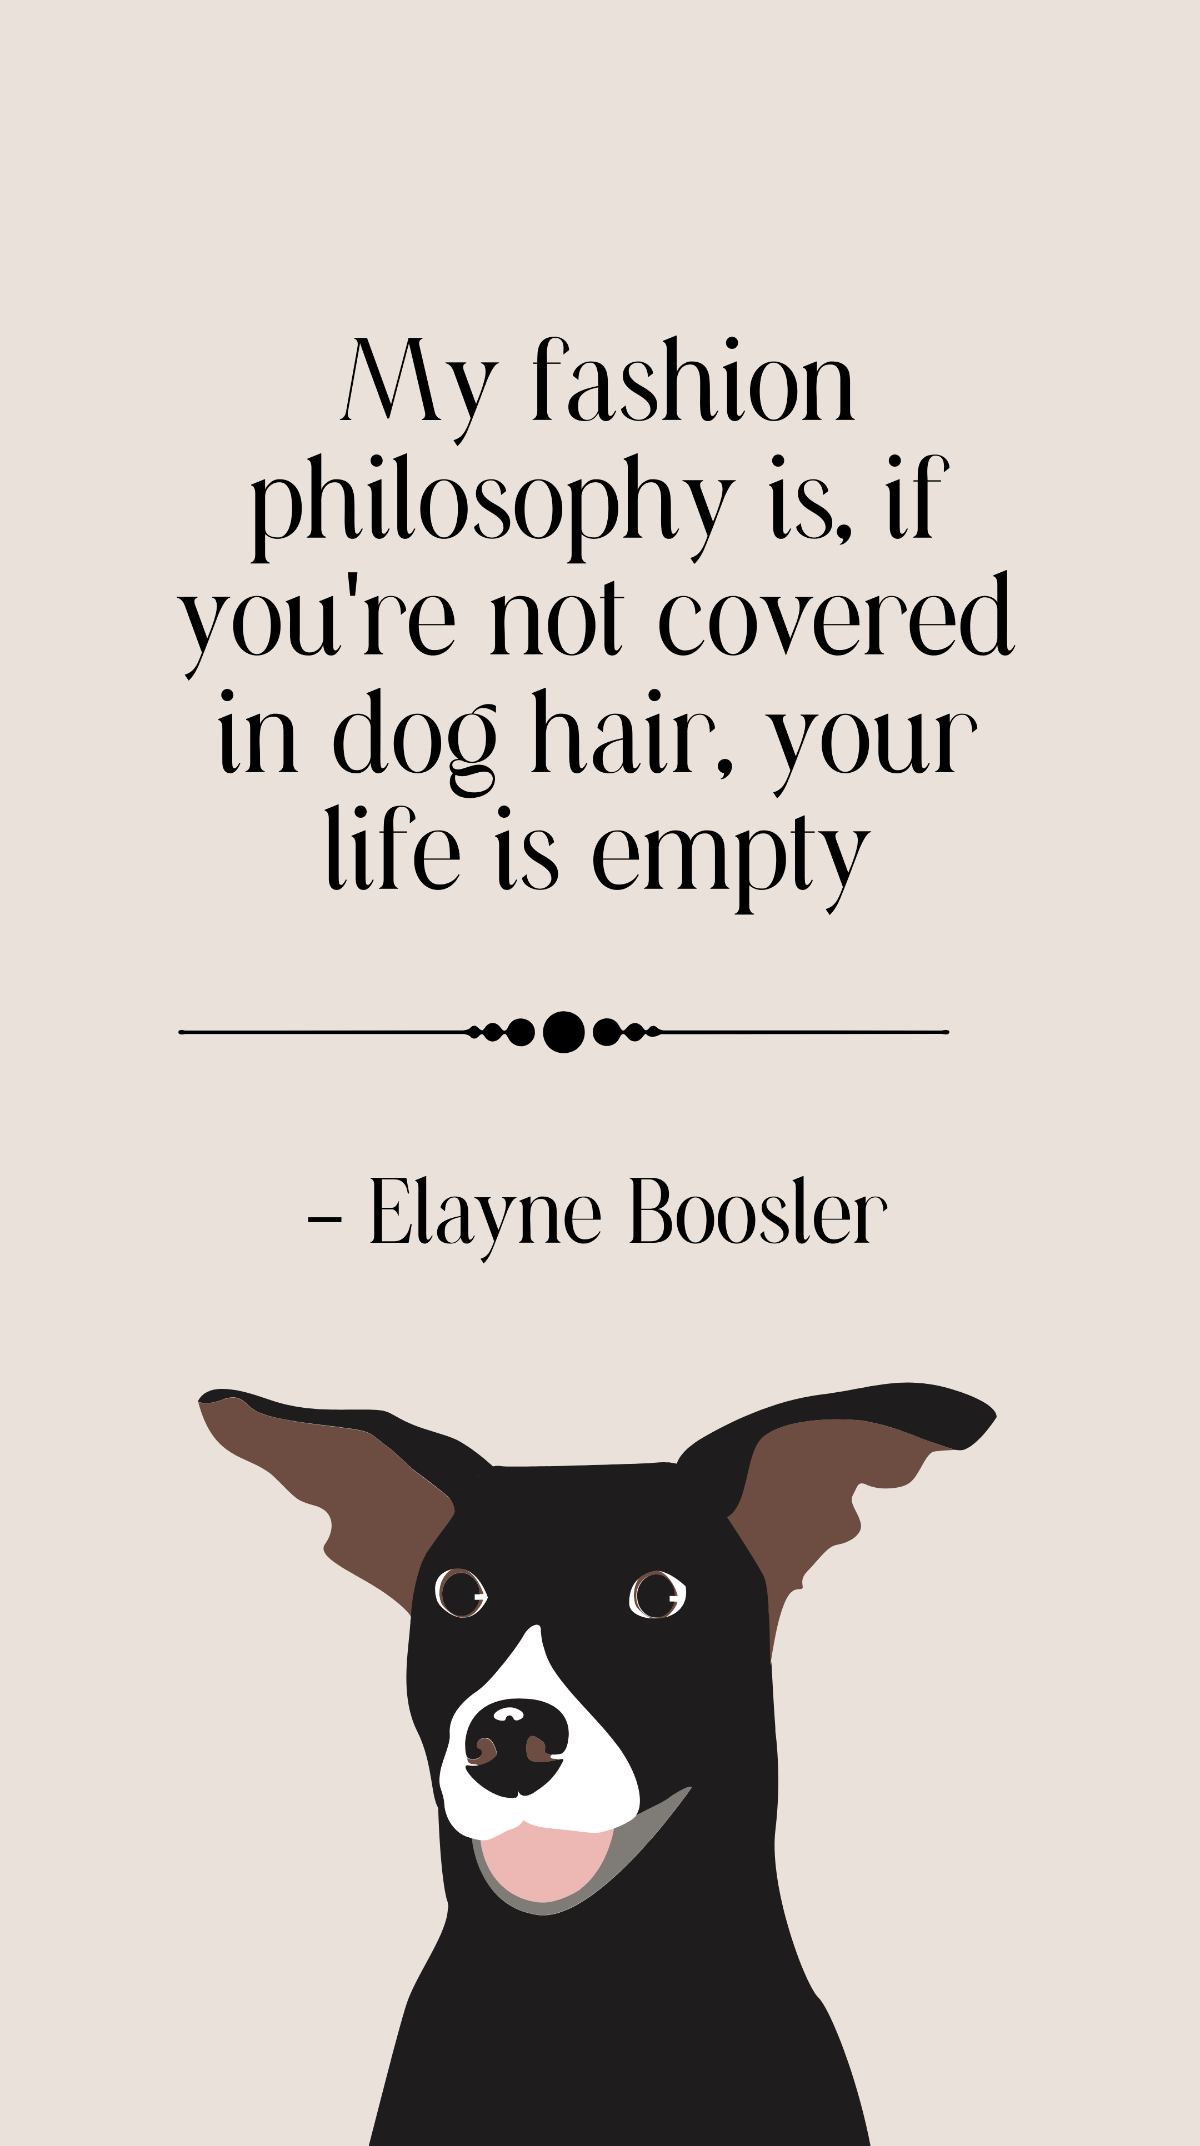 Free Elayne Boosler - My fashion philosophy is, if you're not covered in dog hair, your life is empty Template